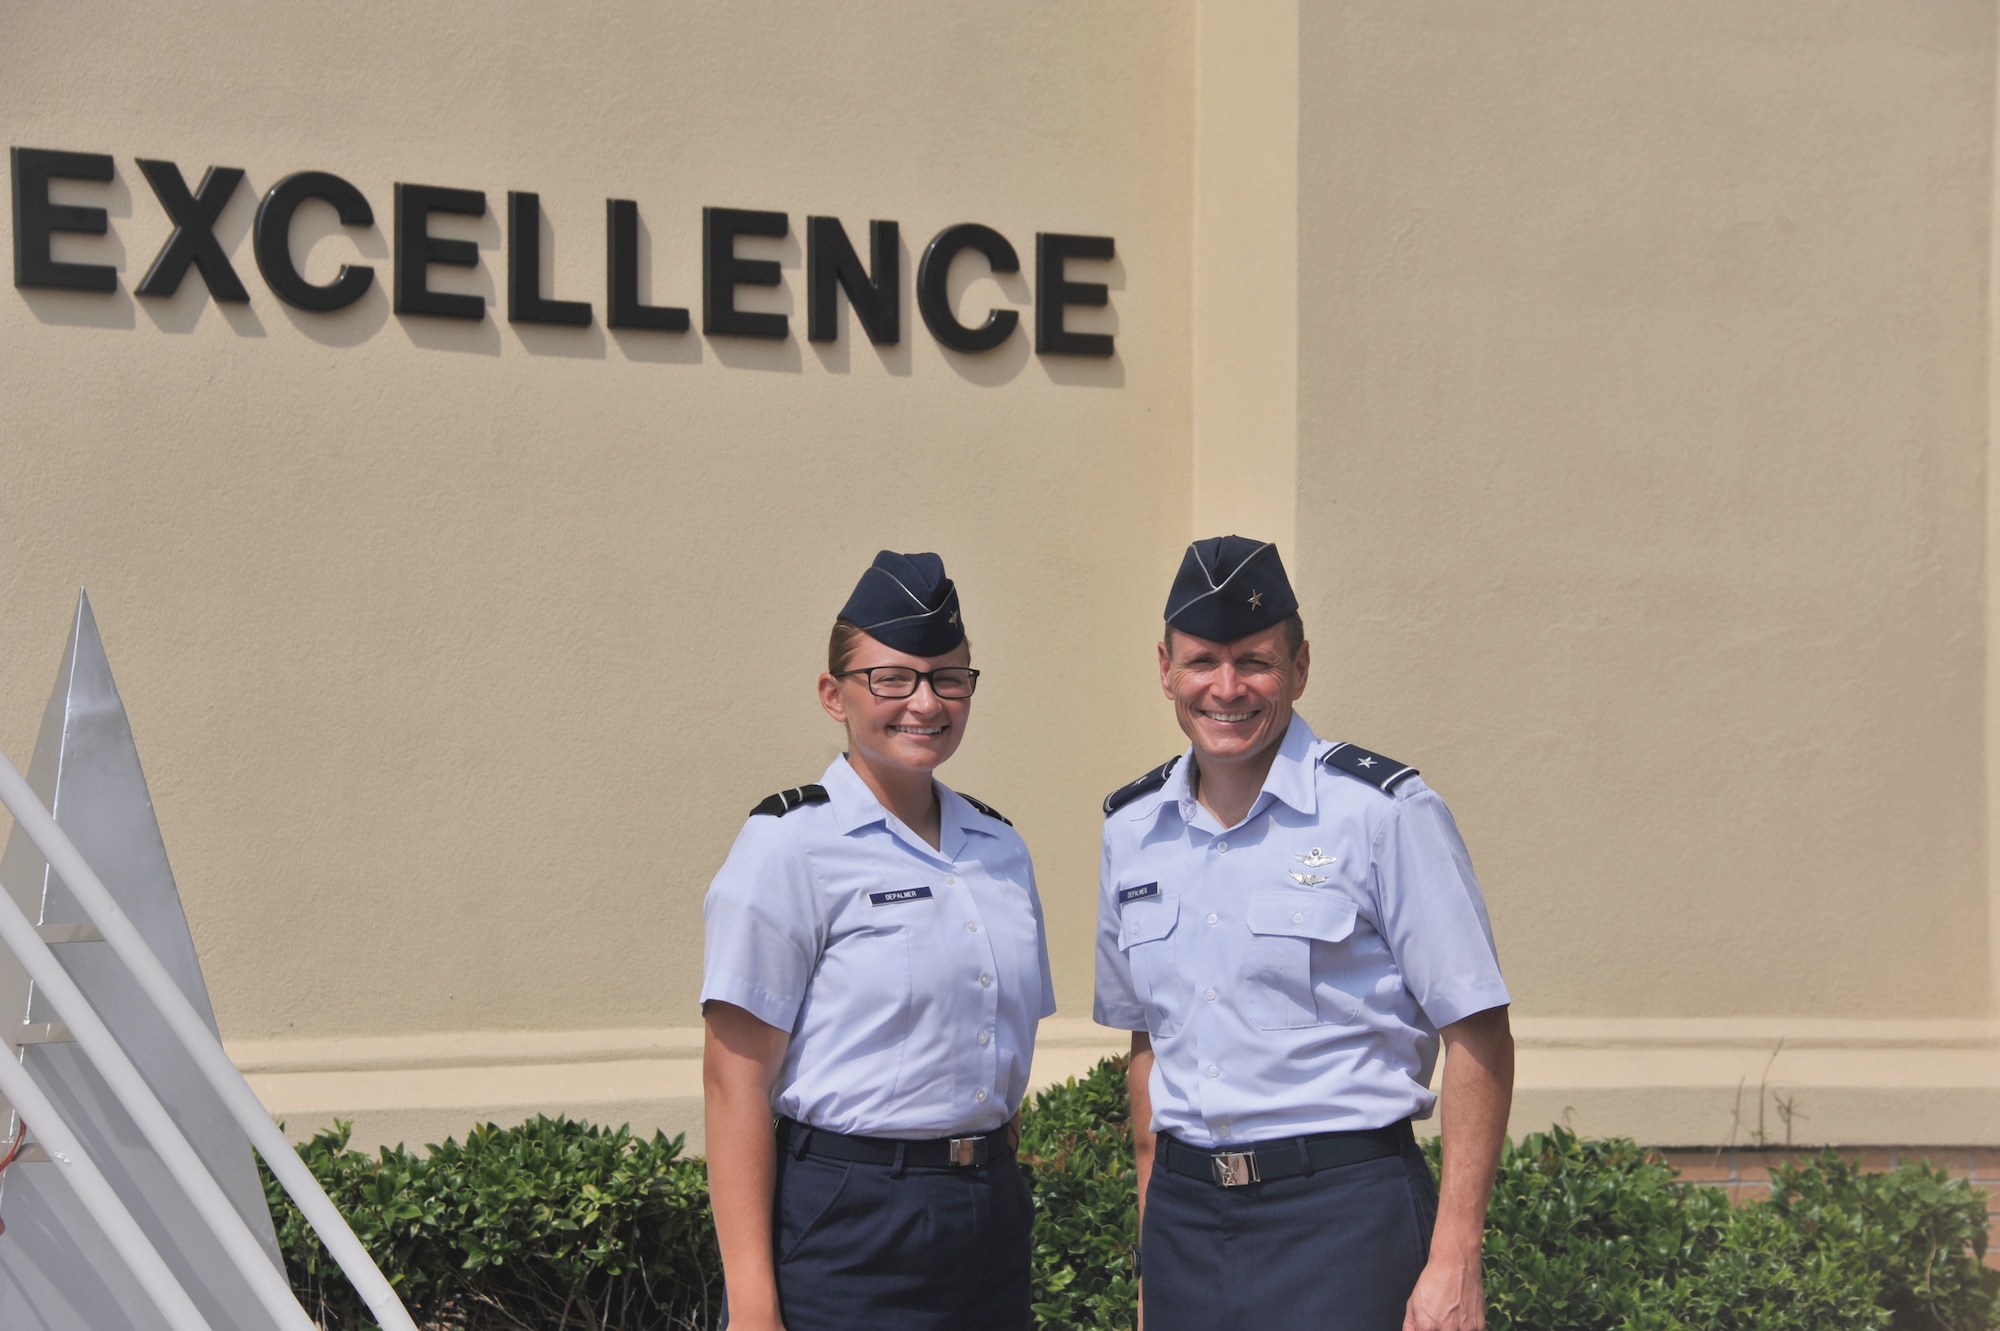 Brigadier Gen. Steve DePalmer, deputy director, Joint Interagency Task Force South, U.S. Southern Command, and his daughter, Air Force Reserve Officer Training Corps Cadet Devin DePalmer, stand outside of the Officer Training School building Aug. 6.  The general surprised his daughter by attending her graduation from AFROTC field training and presenting her with a Prop and Wings pin signifying entry into the professional officer course. (U.S. Air Force photo by Staff Sgt. Gregory Brook)